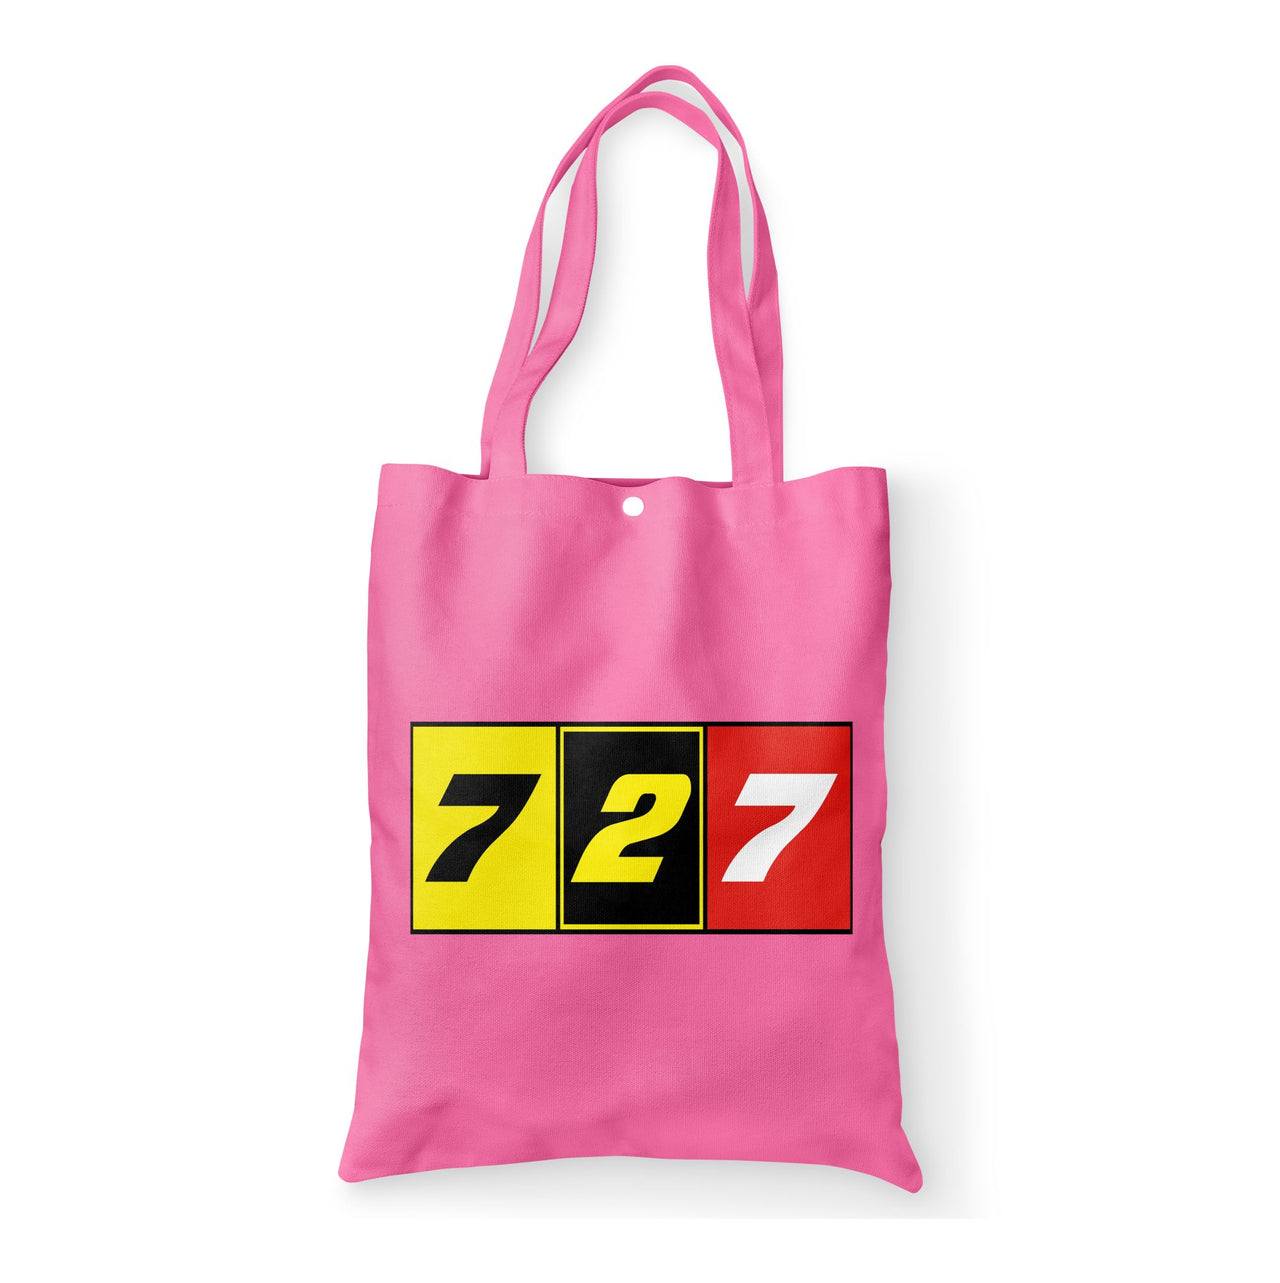 Flat Colourful 727 Designed Tote Bags